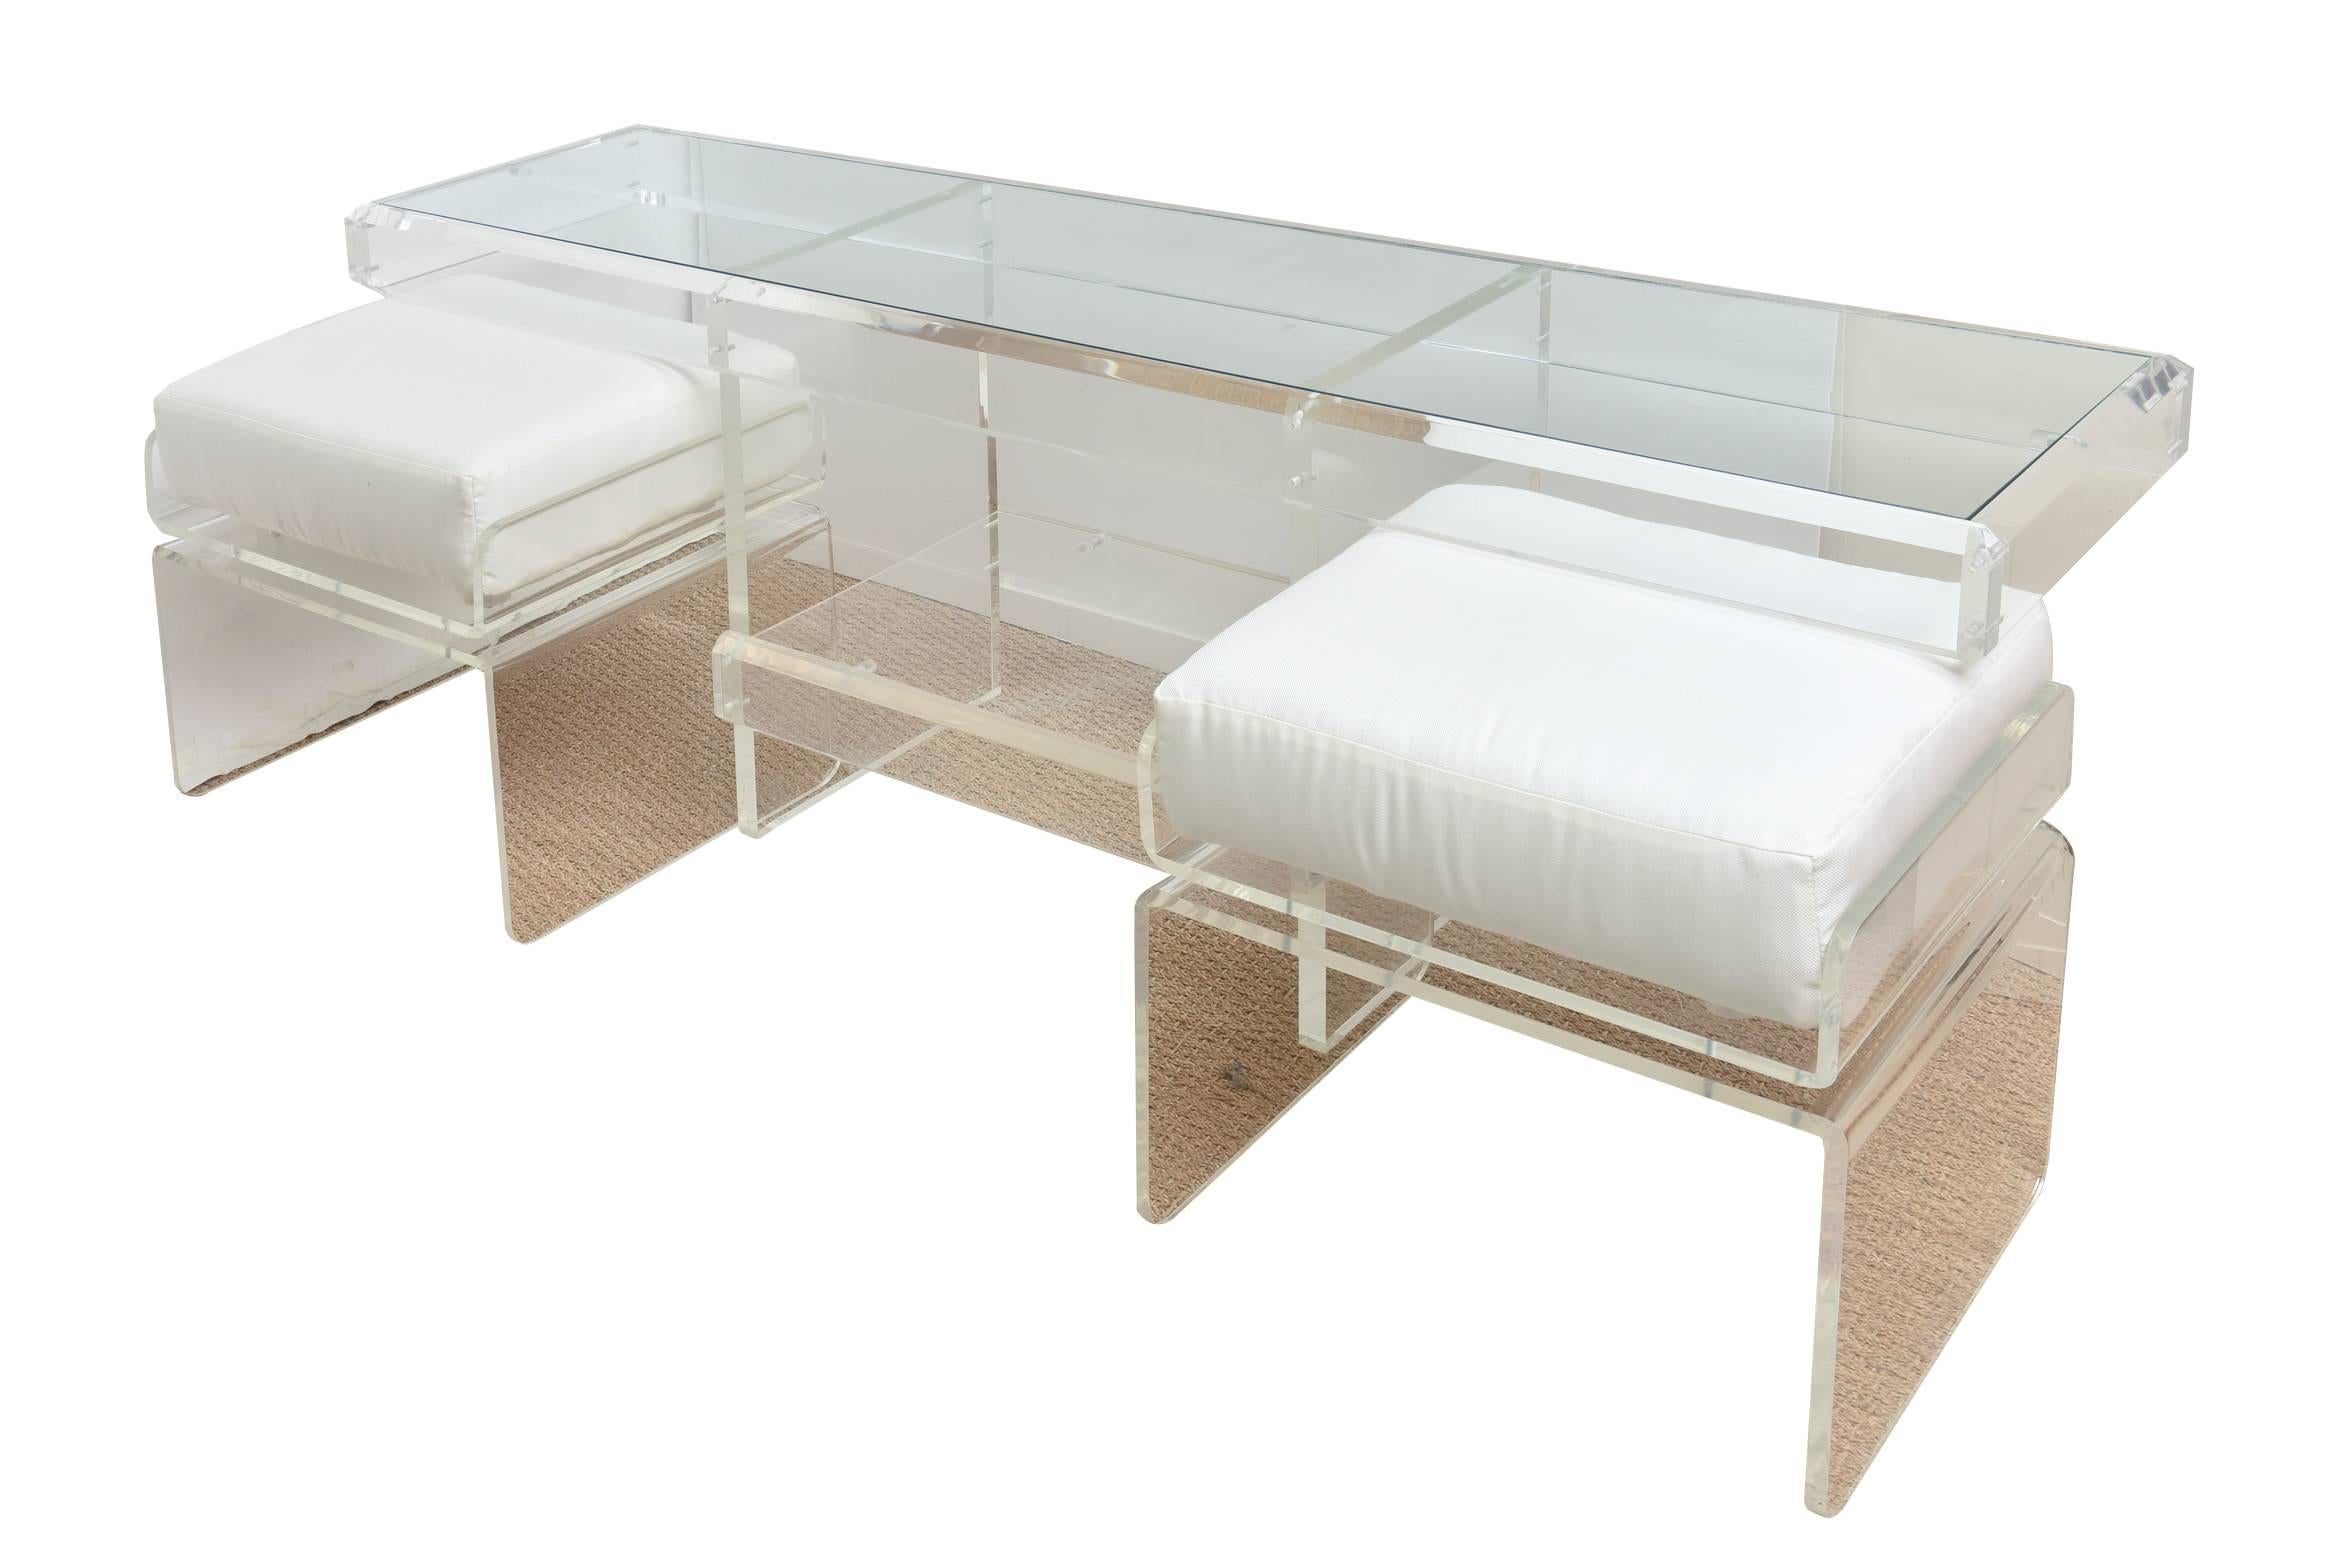 This most diverse and utilitarian Italian vintage lucite low console has two pull-out lucite and upholstered benches. It has a glass top and glass bottom. 
Great for a large contemporary painting hanging over it or a flat screen TV.
A great pair of